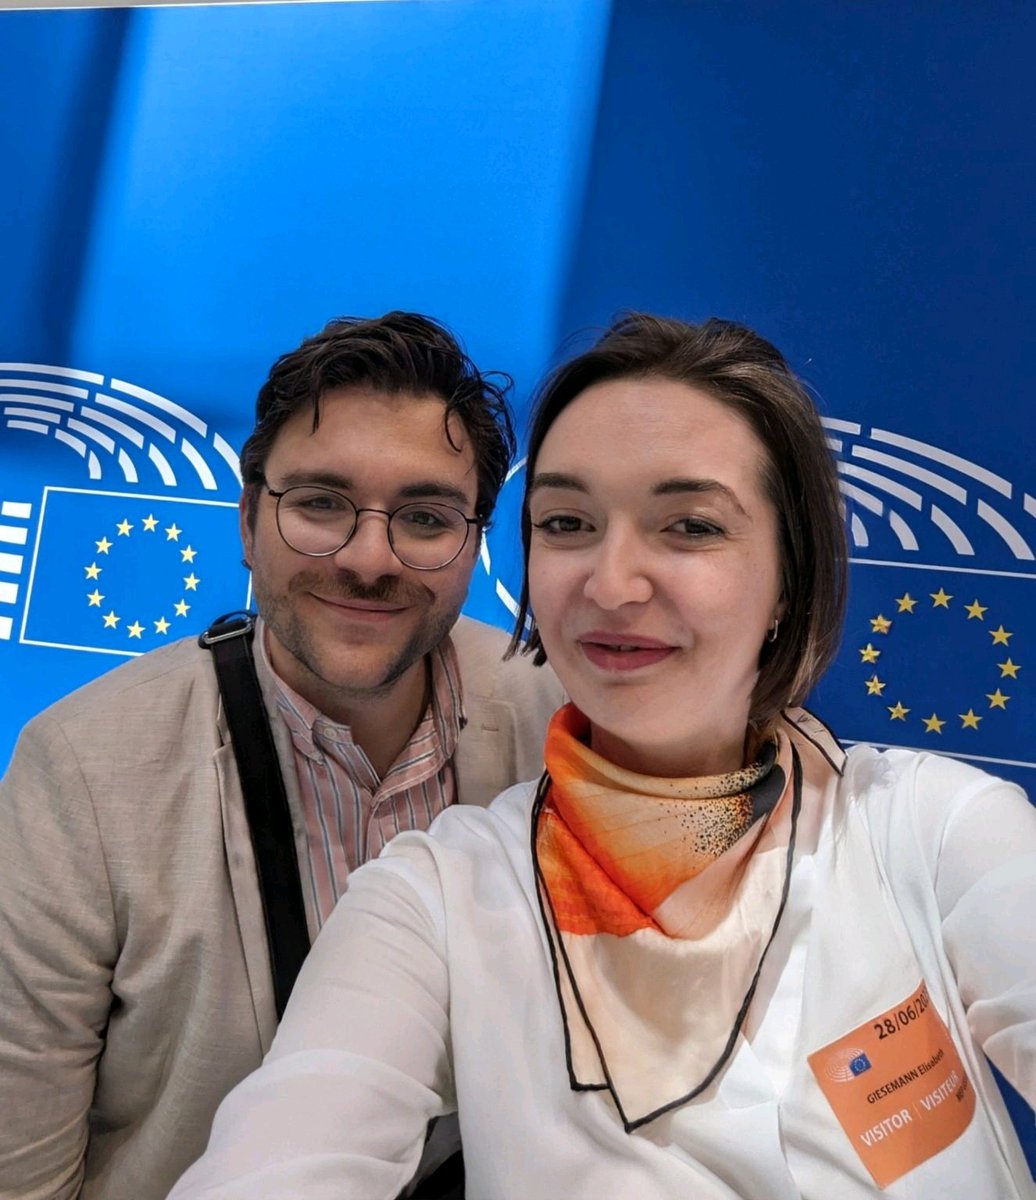 This week I was in Brussels and our delegation met with the Commission, as well as NGOs and members of the European Parliament. We discussed #chips #digitalsovereignty #disinformation and the  #twintransition 🇪🇺